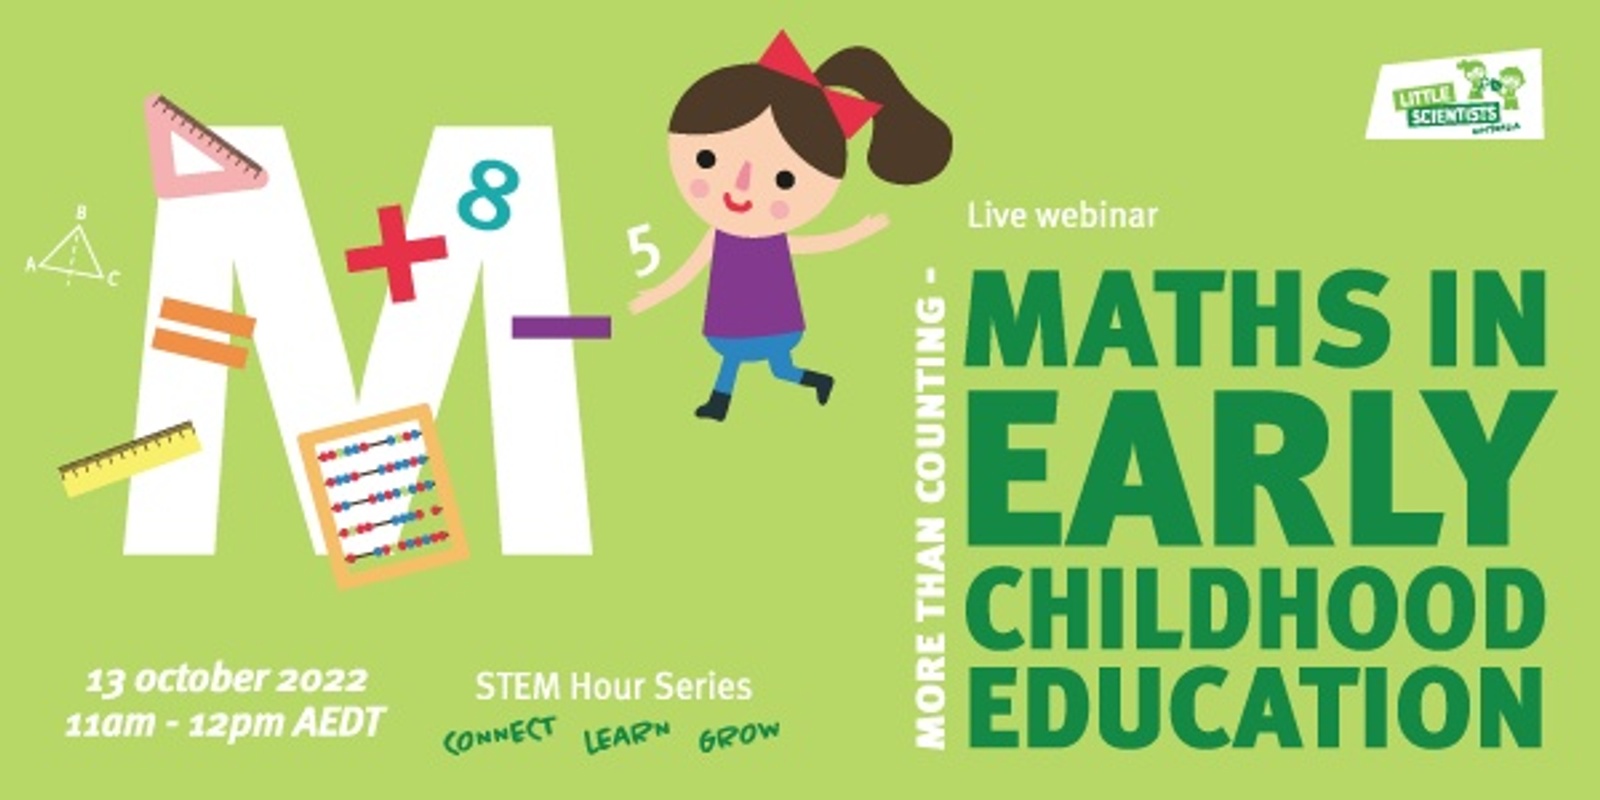 Banner image for STEM Hour: Connect, learn, grow - More than counting: Maths in early childhood education